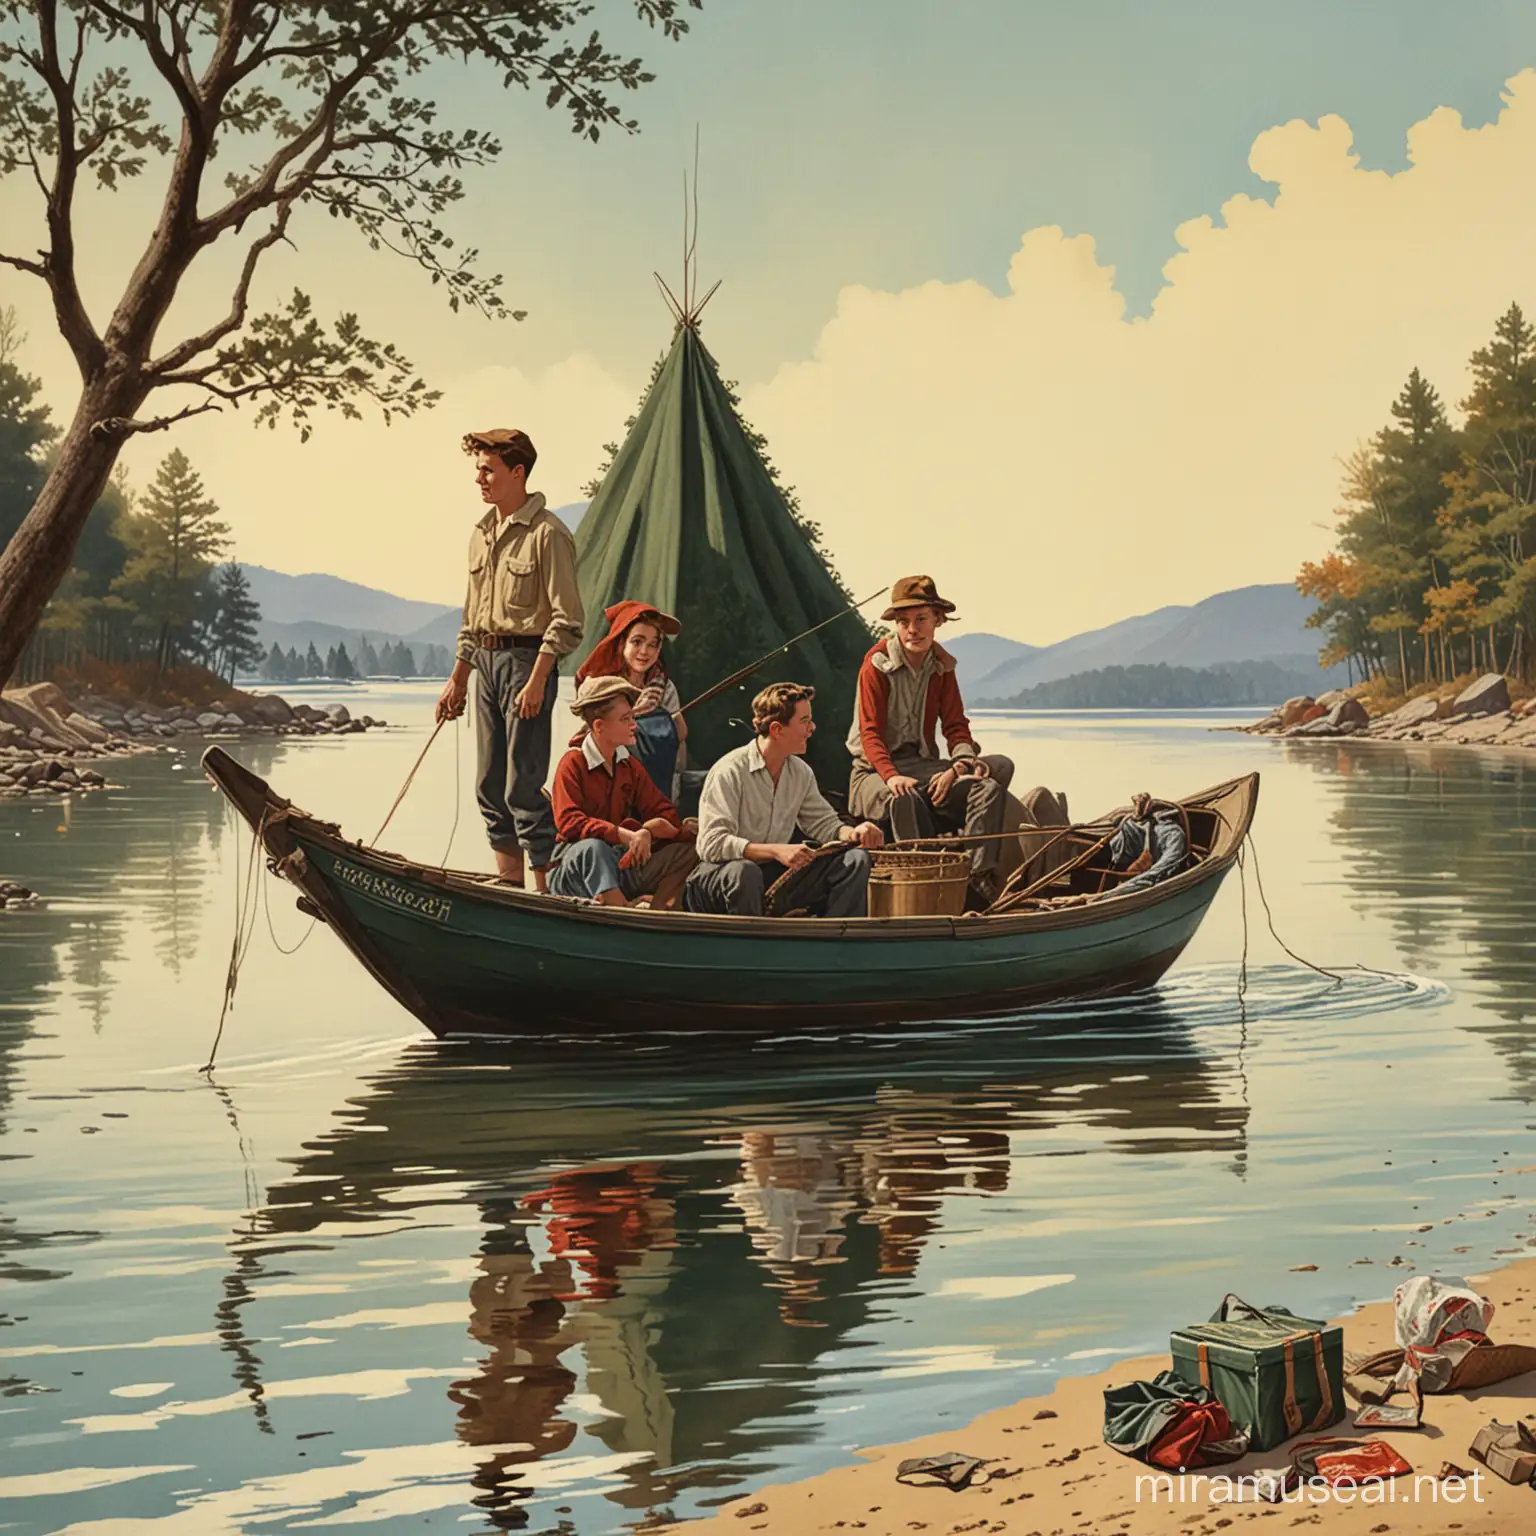 Norman Rockwell style illustrated magazine advertisement from the 1940's depicting four scenes from "a day in Lake City", the top left scene is a man and a boy in a fishing boat, the top right is a woman riding a horse, the bottom left is a child playing on the beach, the bottom right is four hooded figures standing around a black Christmas tree with an alien head